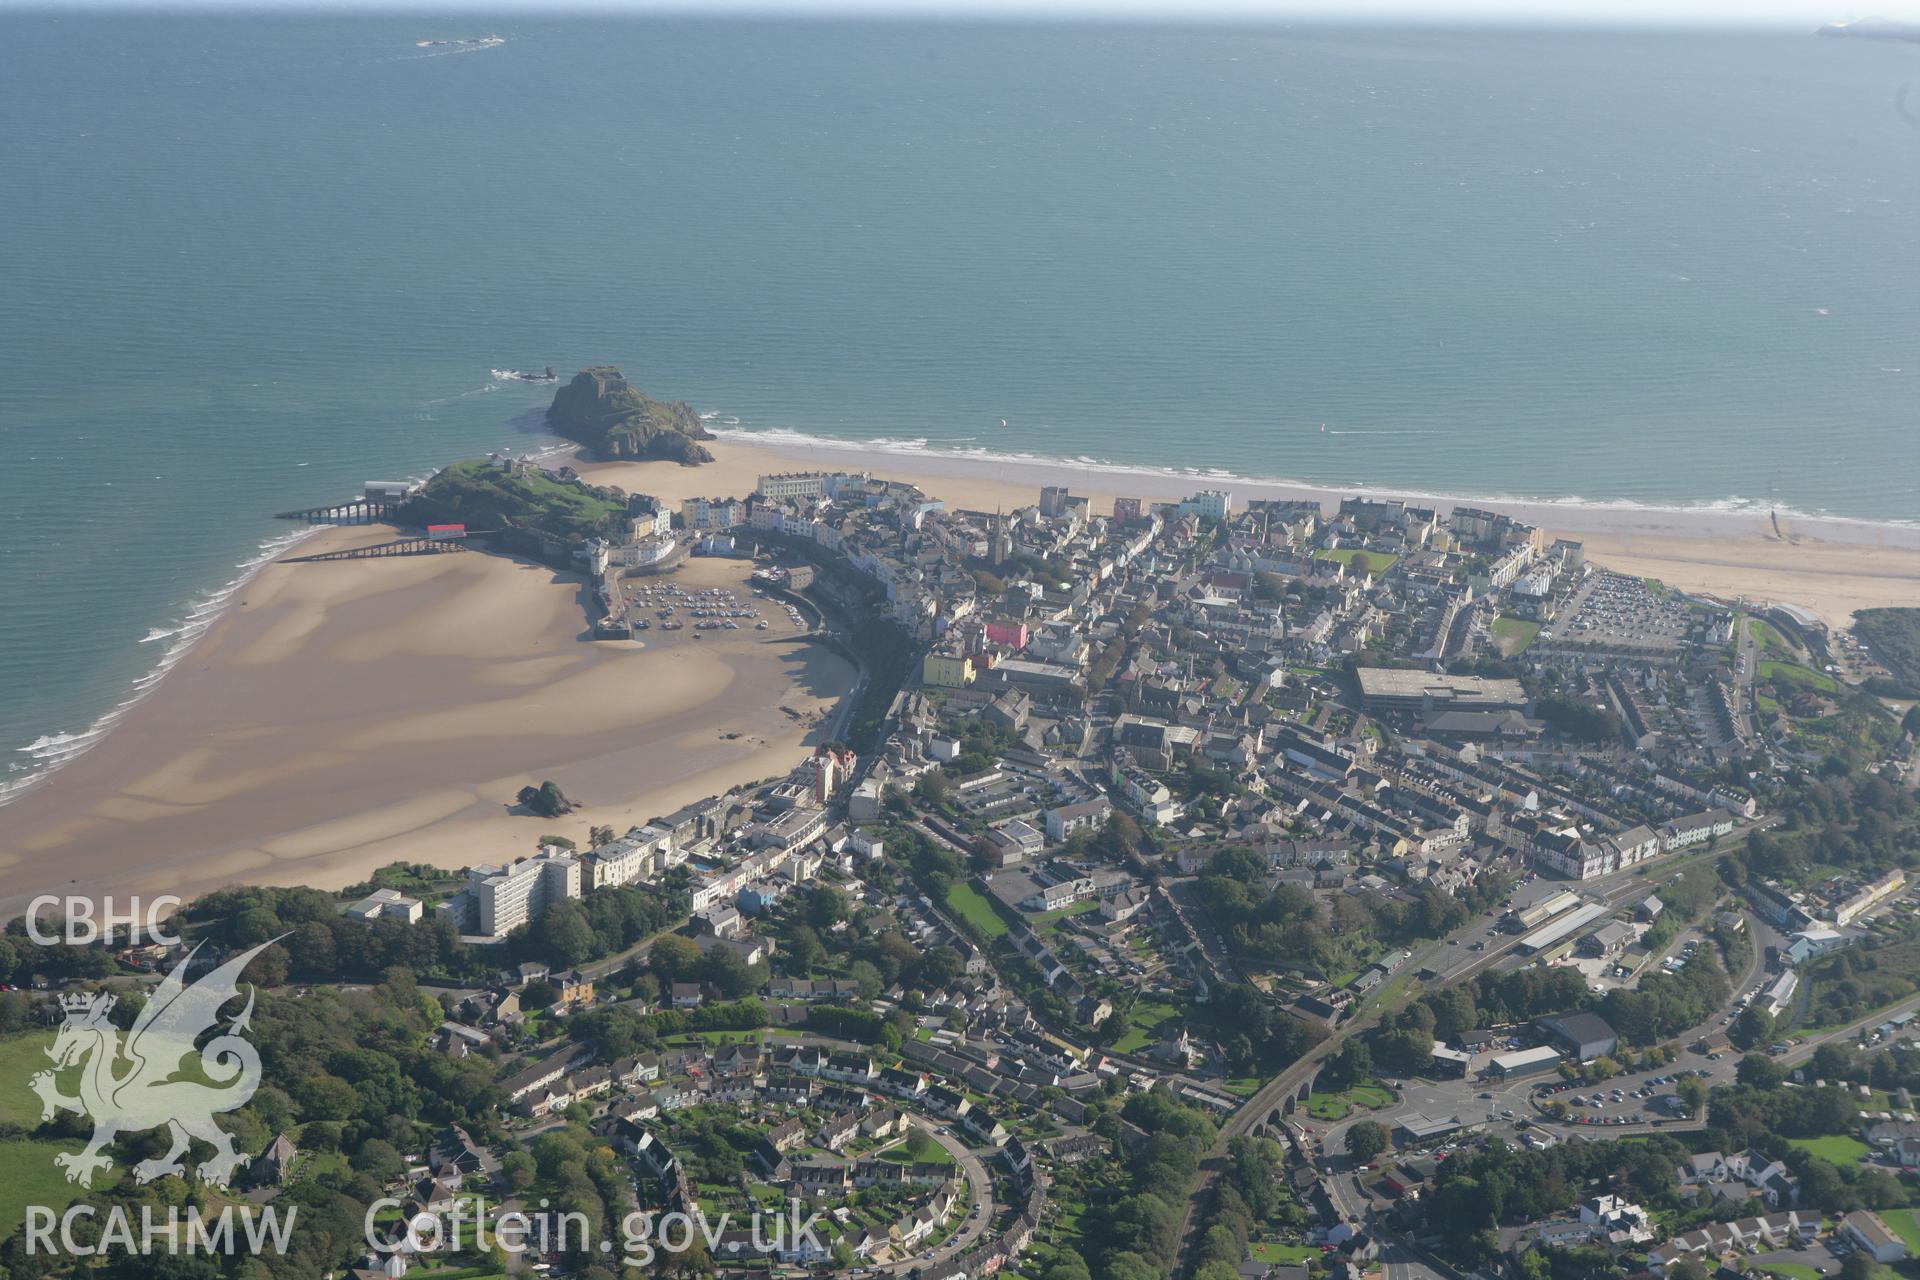 RCAHMW colour oblique photograph of Tenby, viewed from the north west. Taken by Toby Driver and Oliver Davies on 28/09/2011.